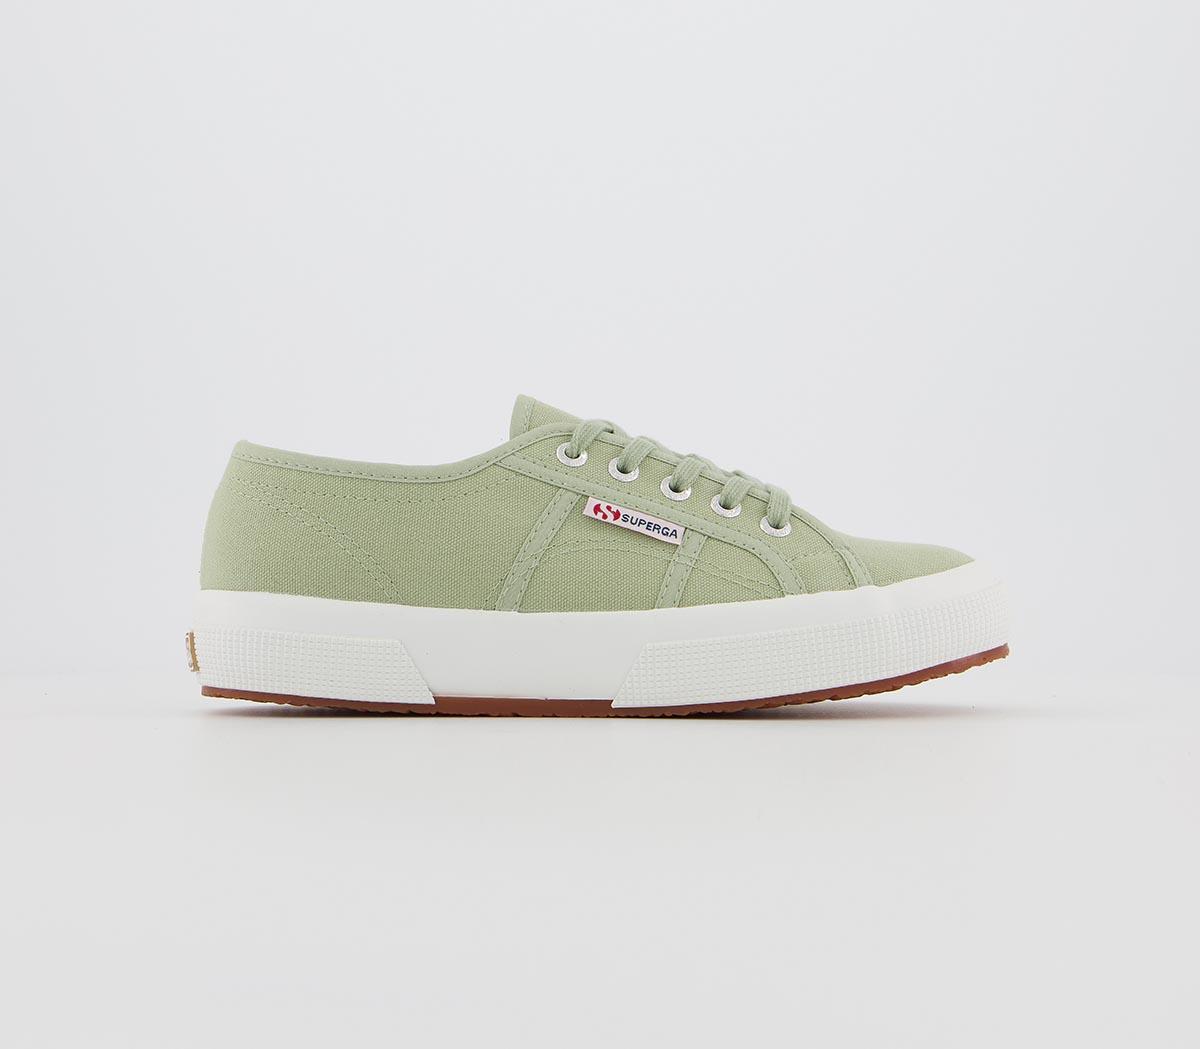 sage green trainers